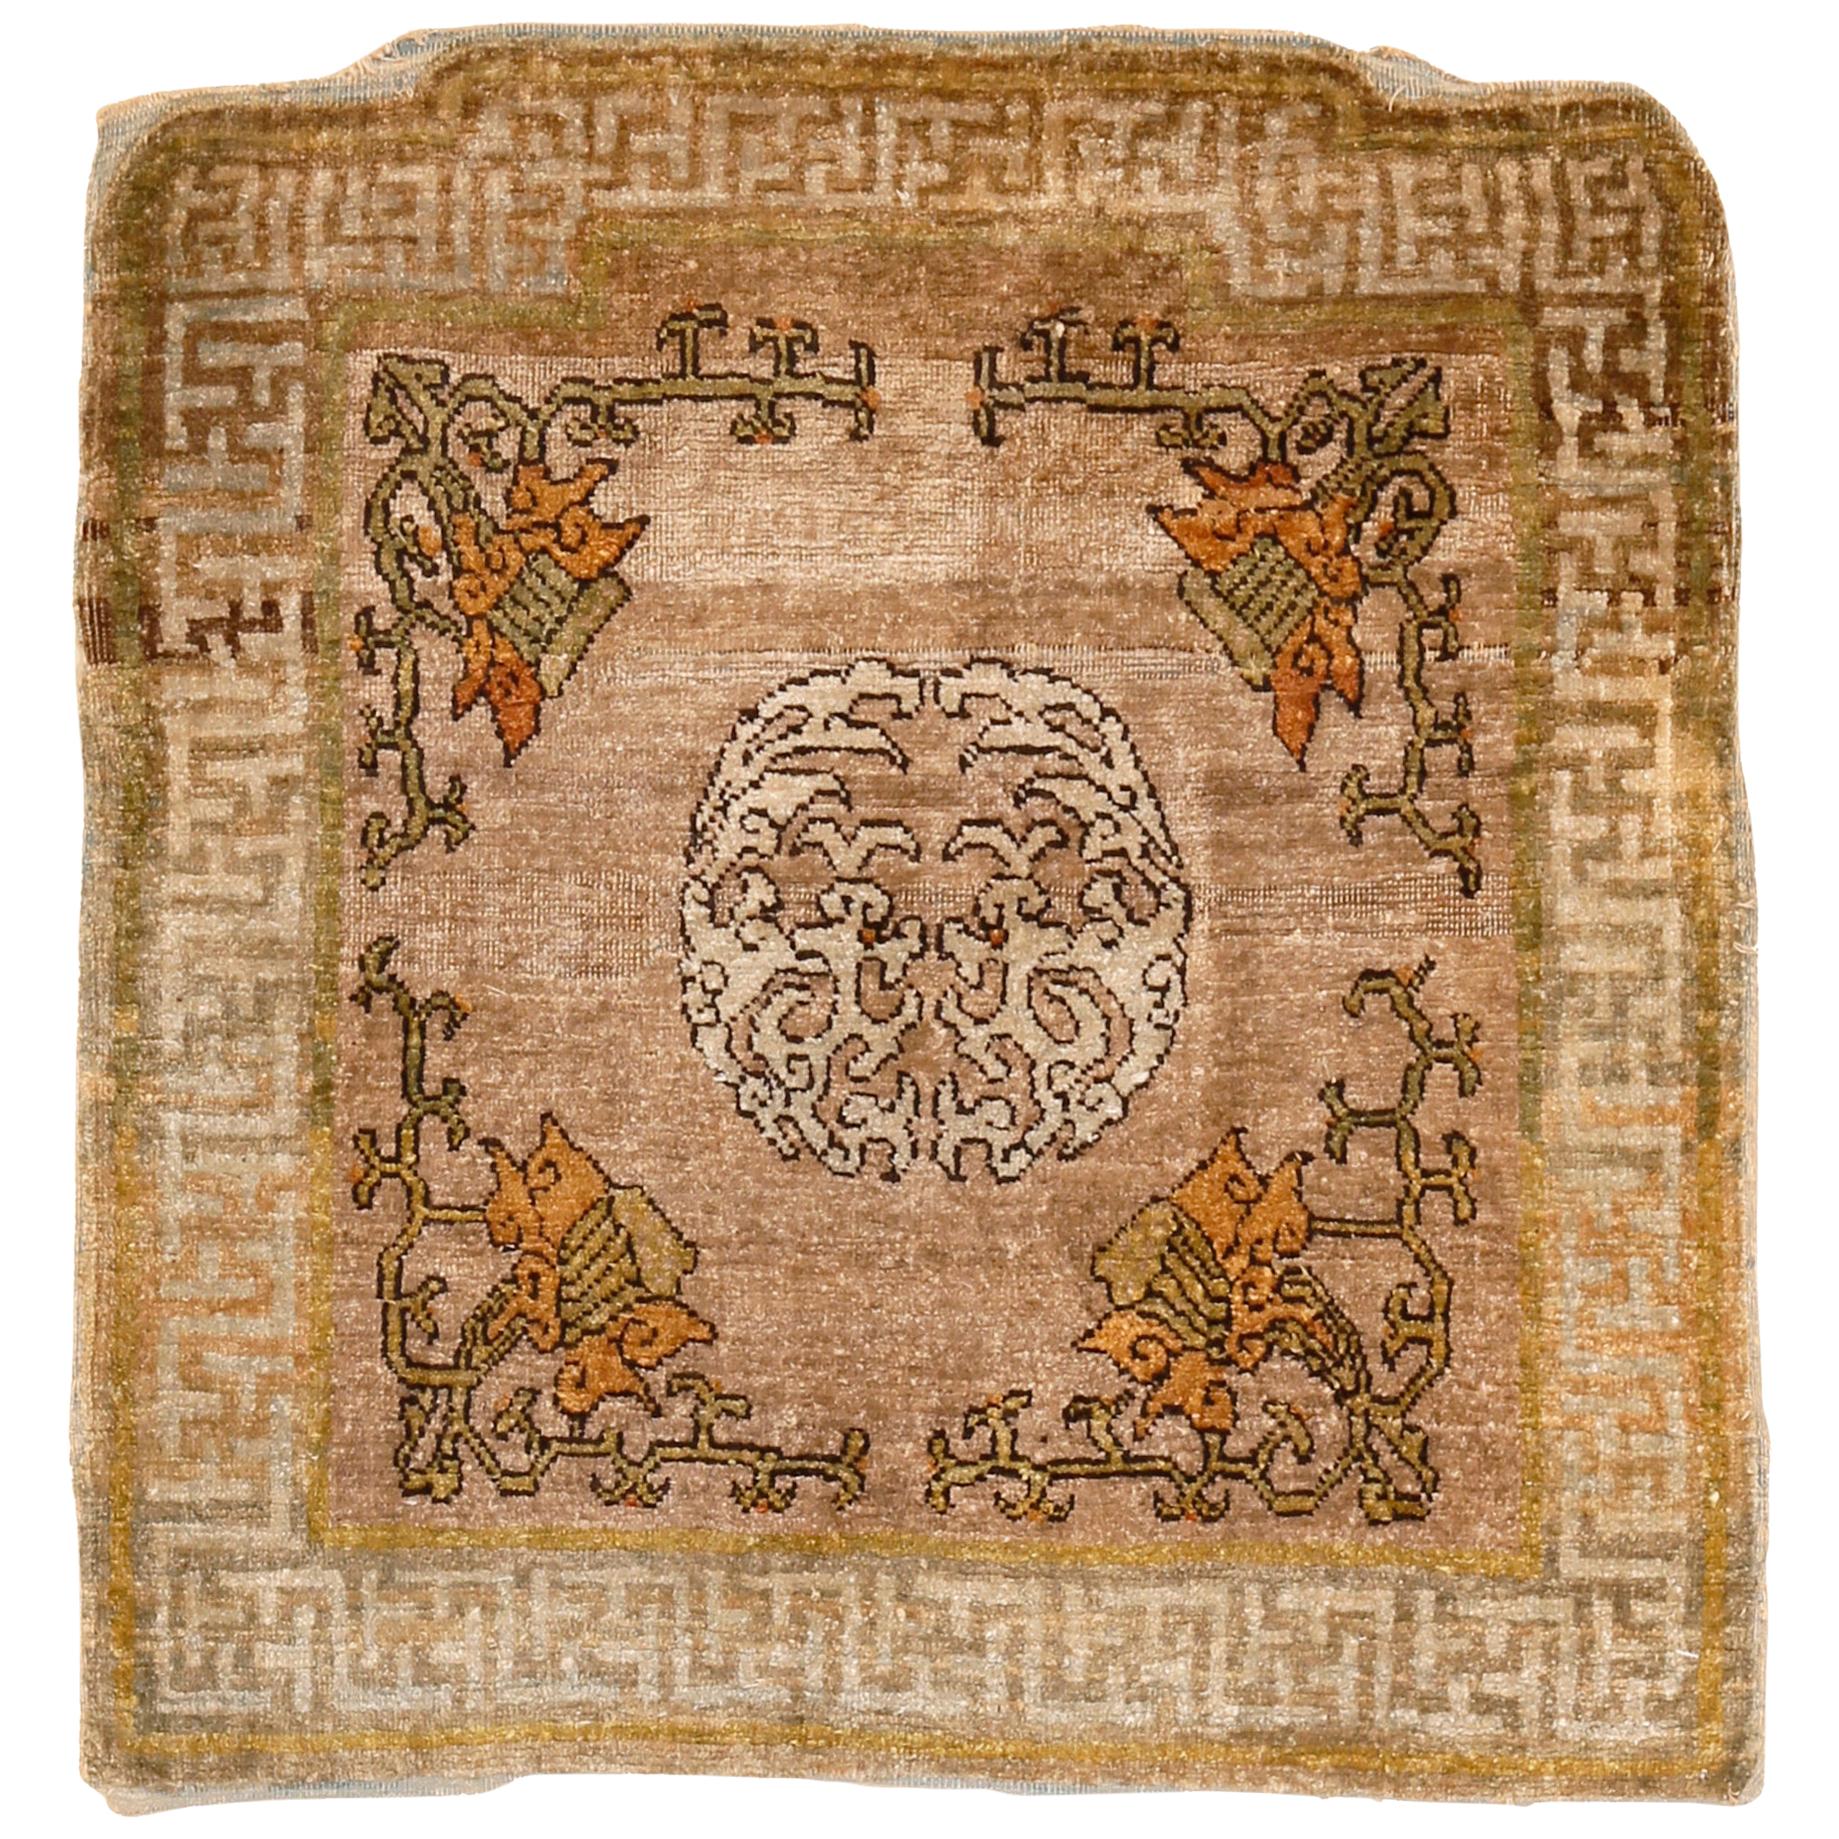 Antique Silk Yarkand Throne Cover Rug with Opposing Dragons and Lotus Flowers